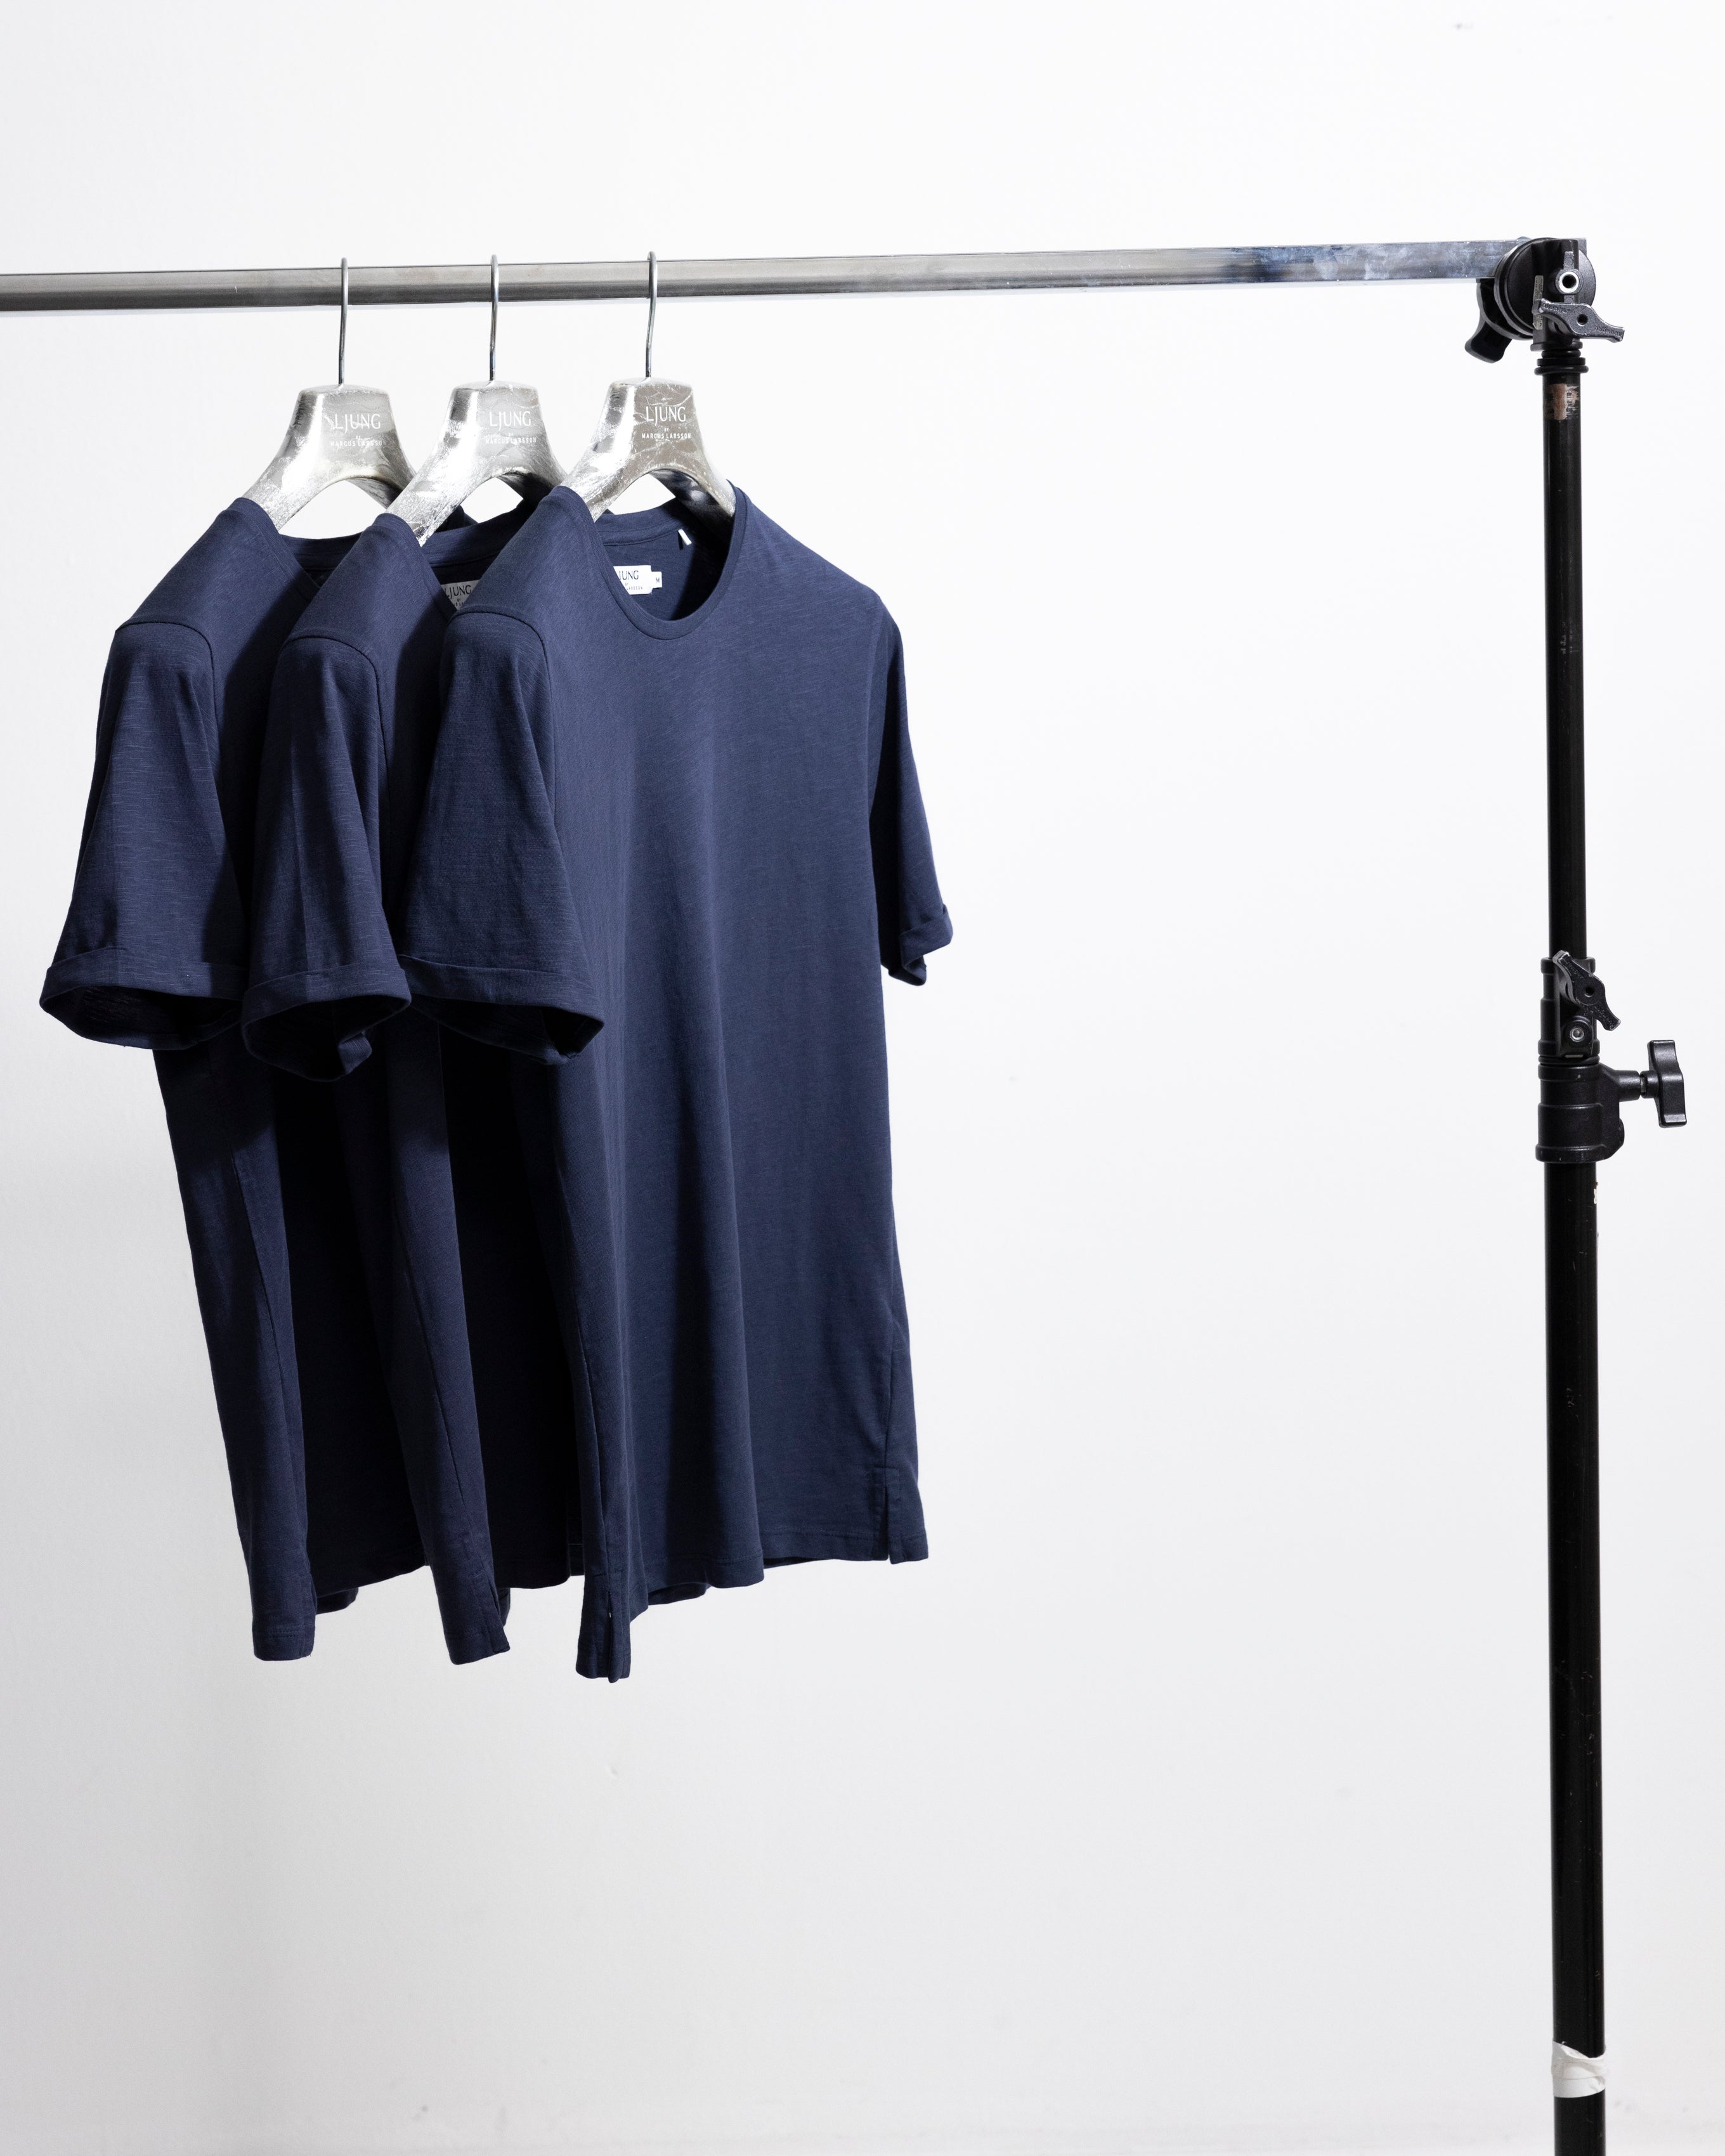 Core Tee 3 Pack - Dusty Blue-Ljung by Marcus Larsson